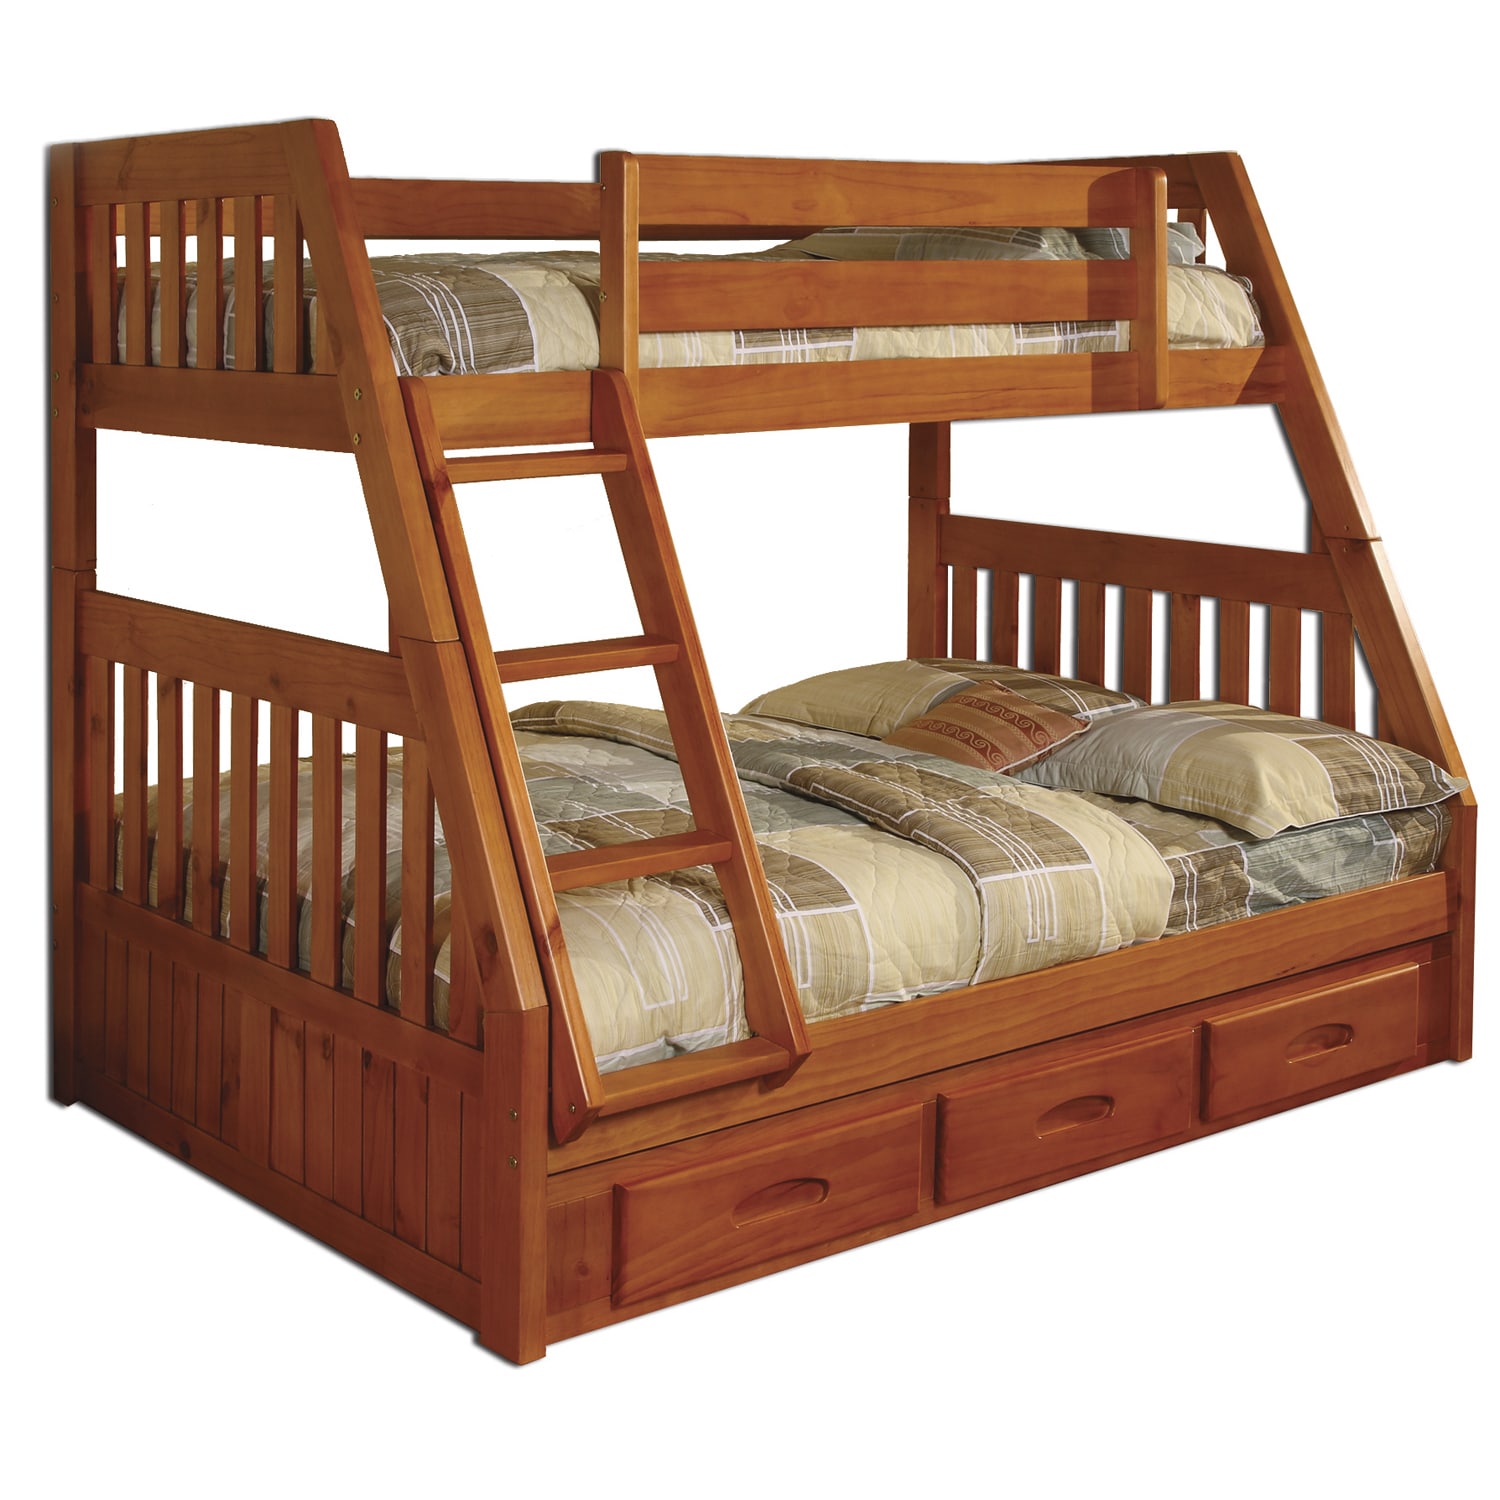 Honey Pine Wood Twin Over Full 3 Drawer Underneath Bunk Bed With Bonus Desk Hutch And Chair Overstock 12103948